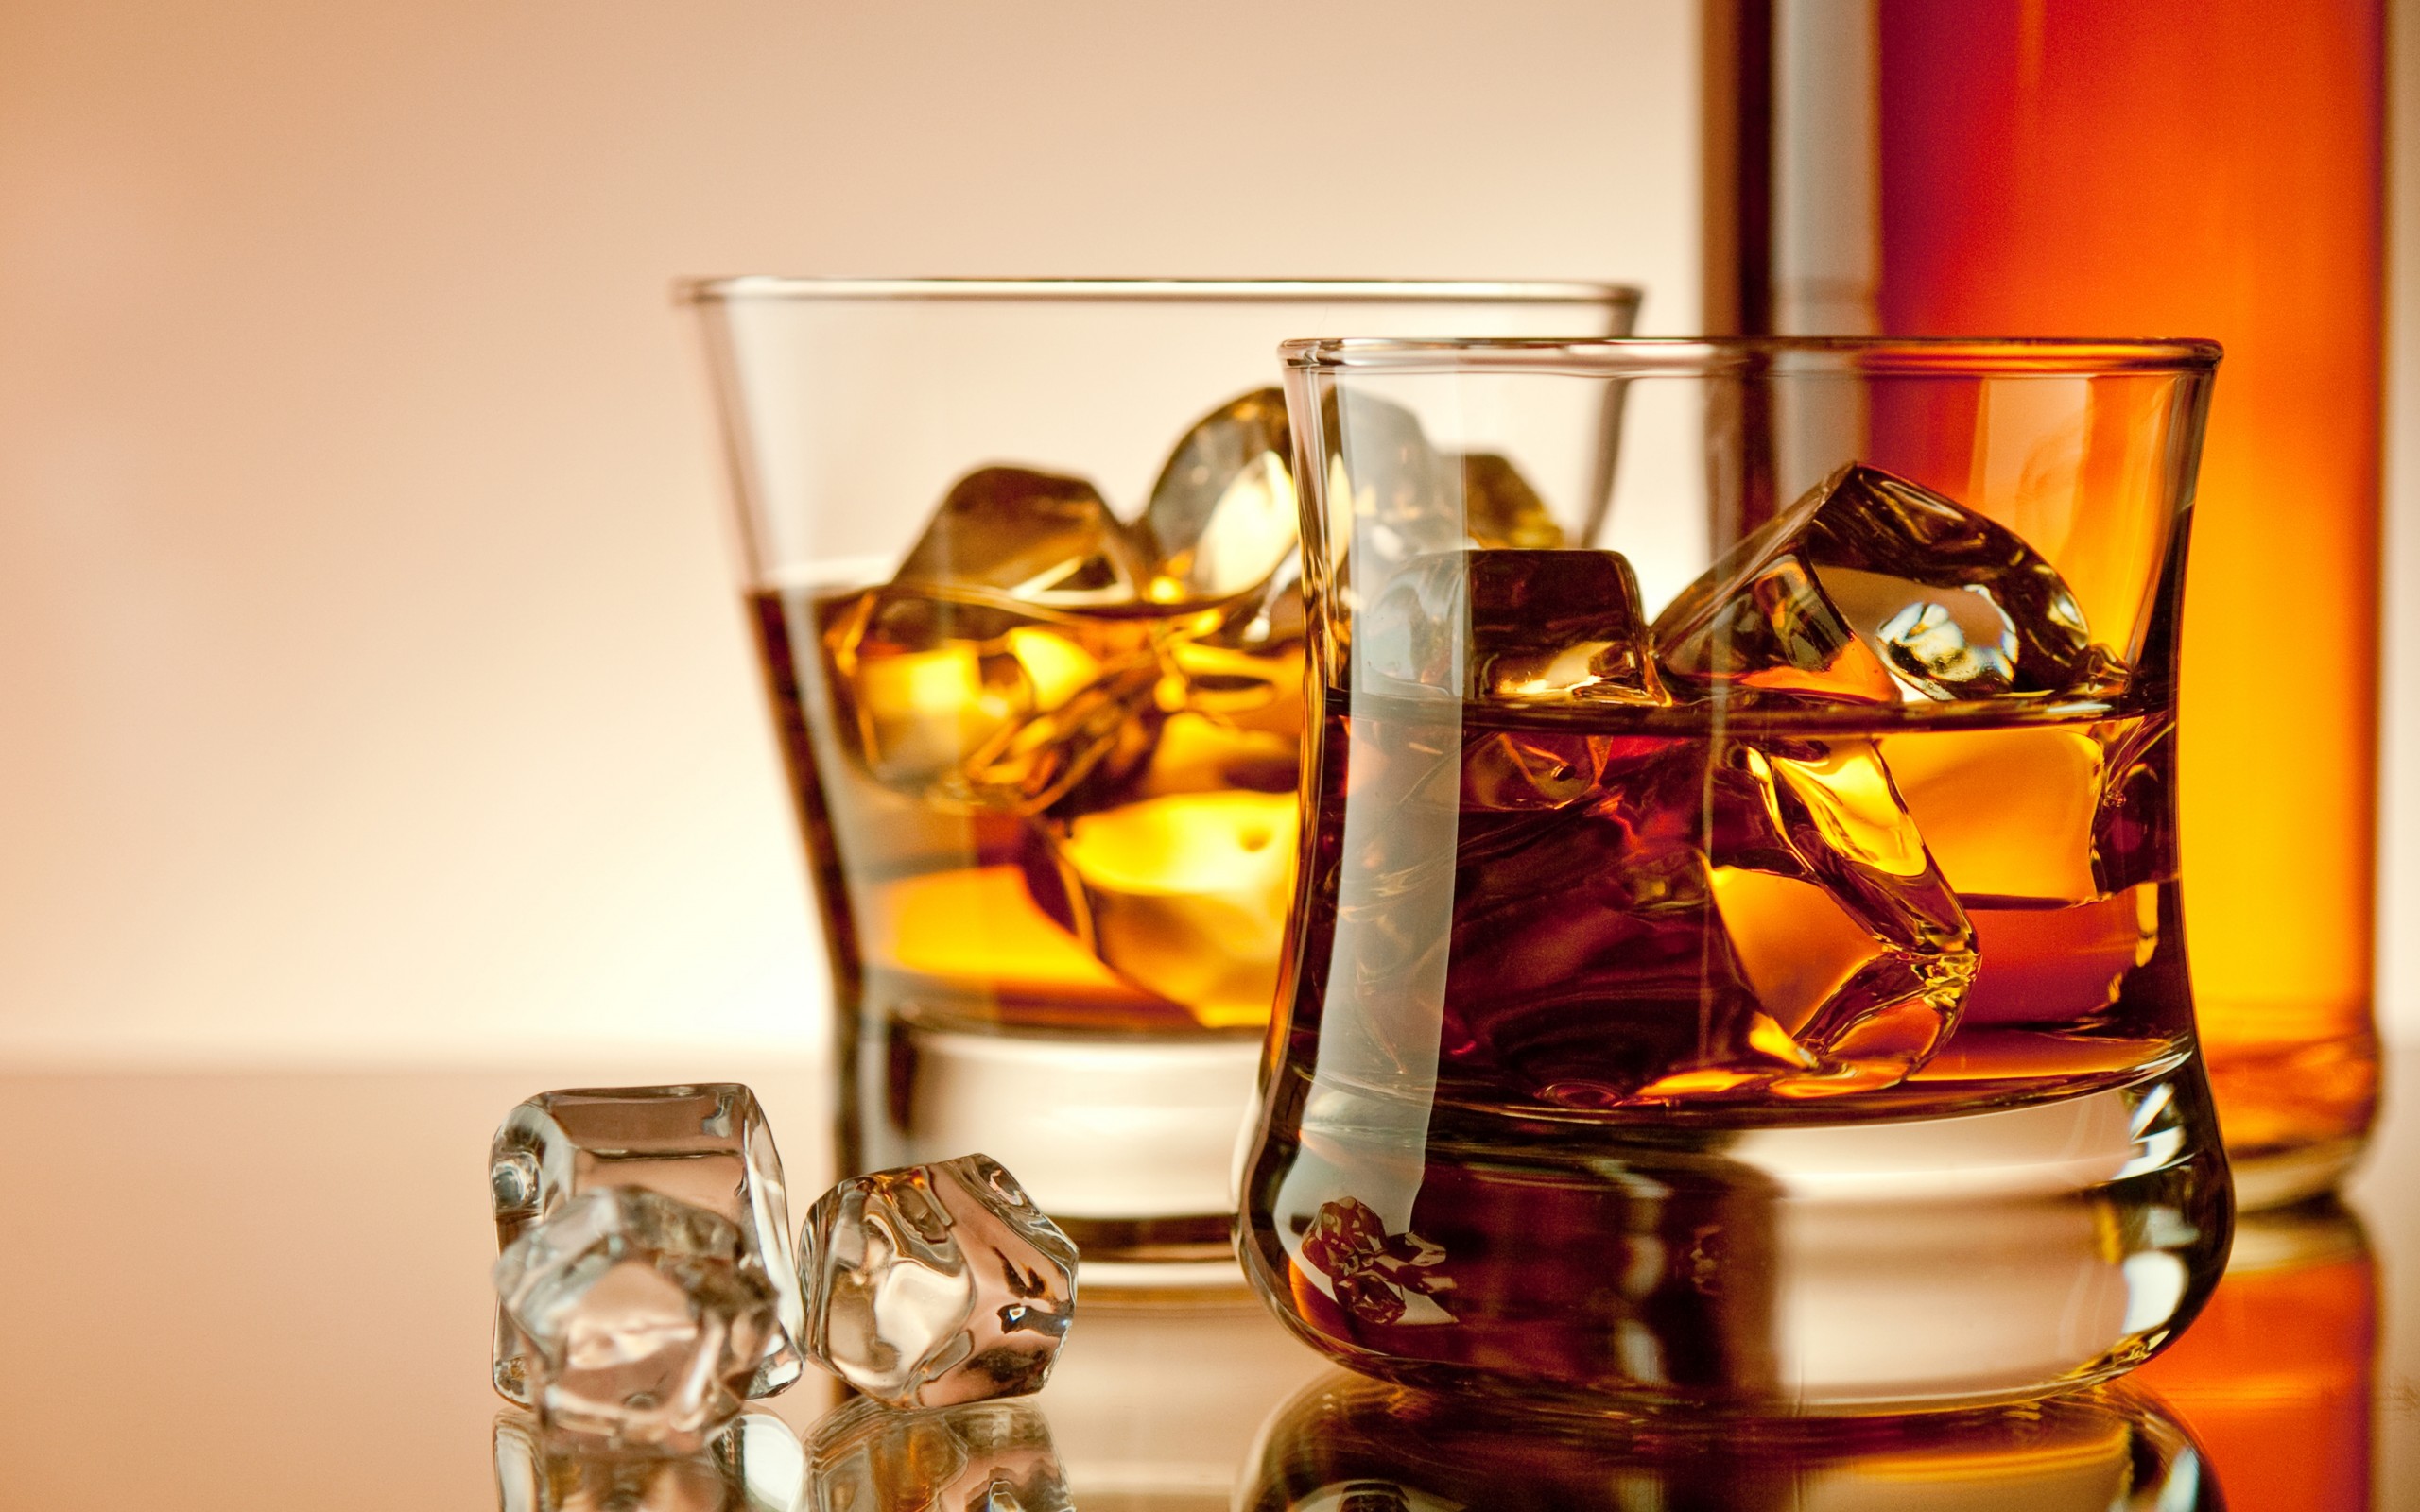 Whisky Background - 2560x1600 Wallpaper 